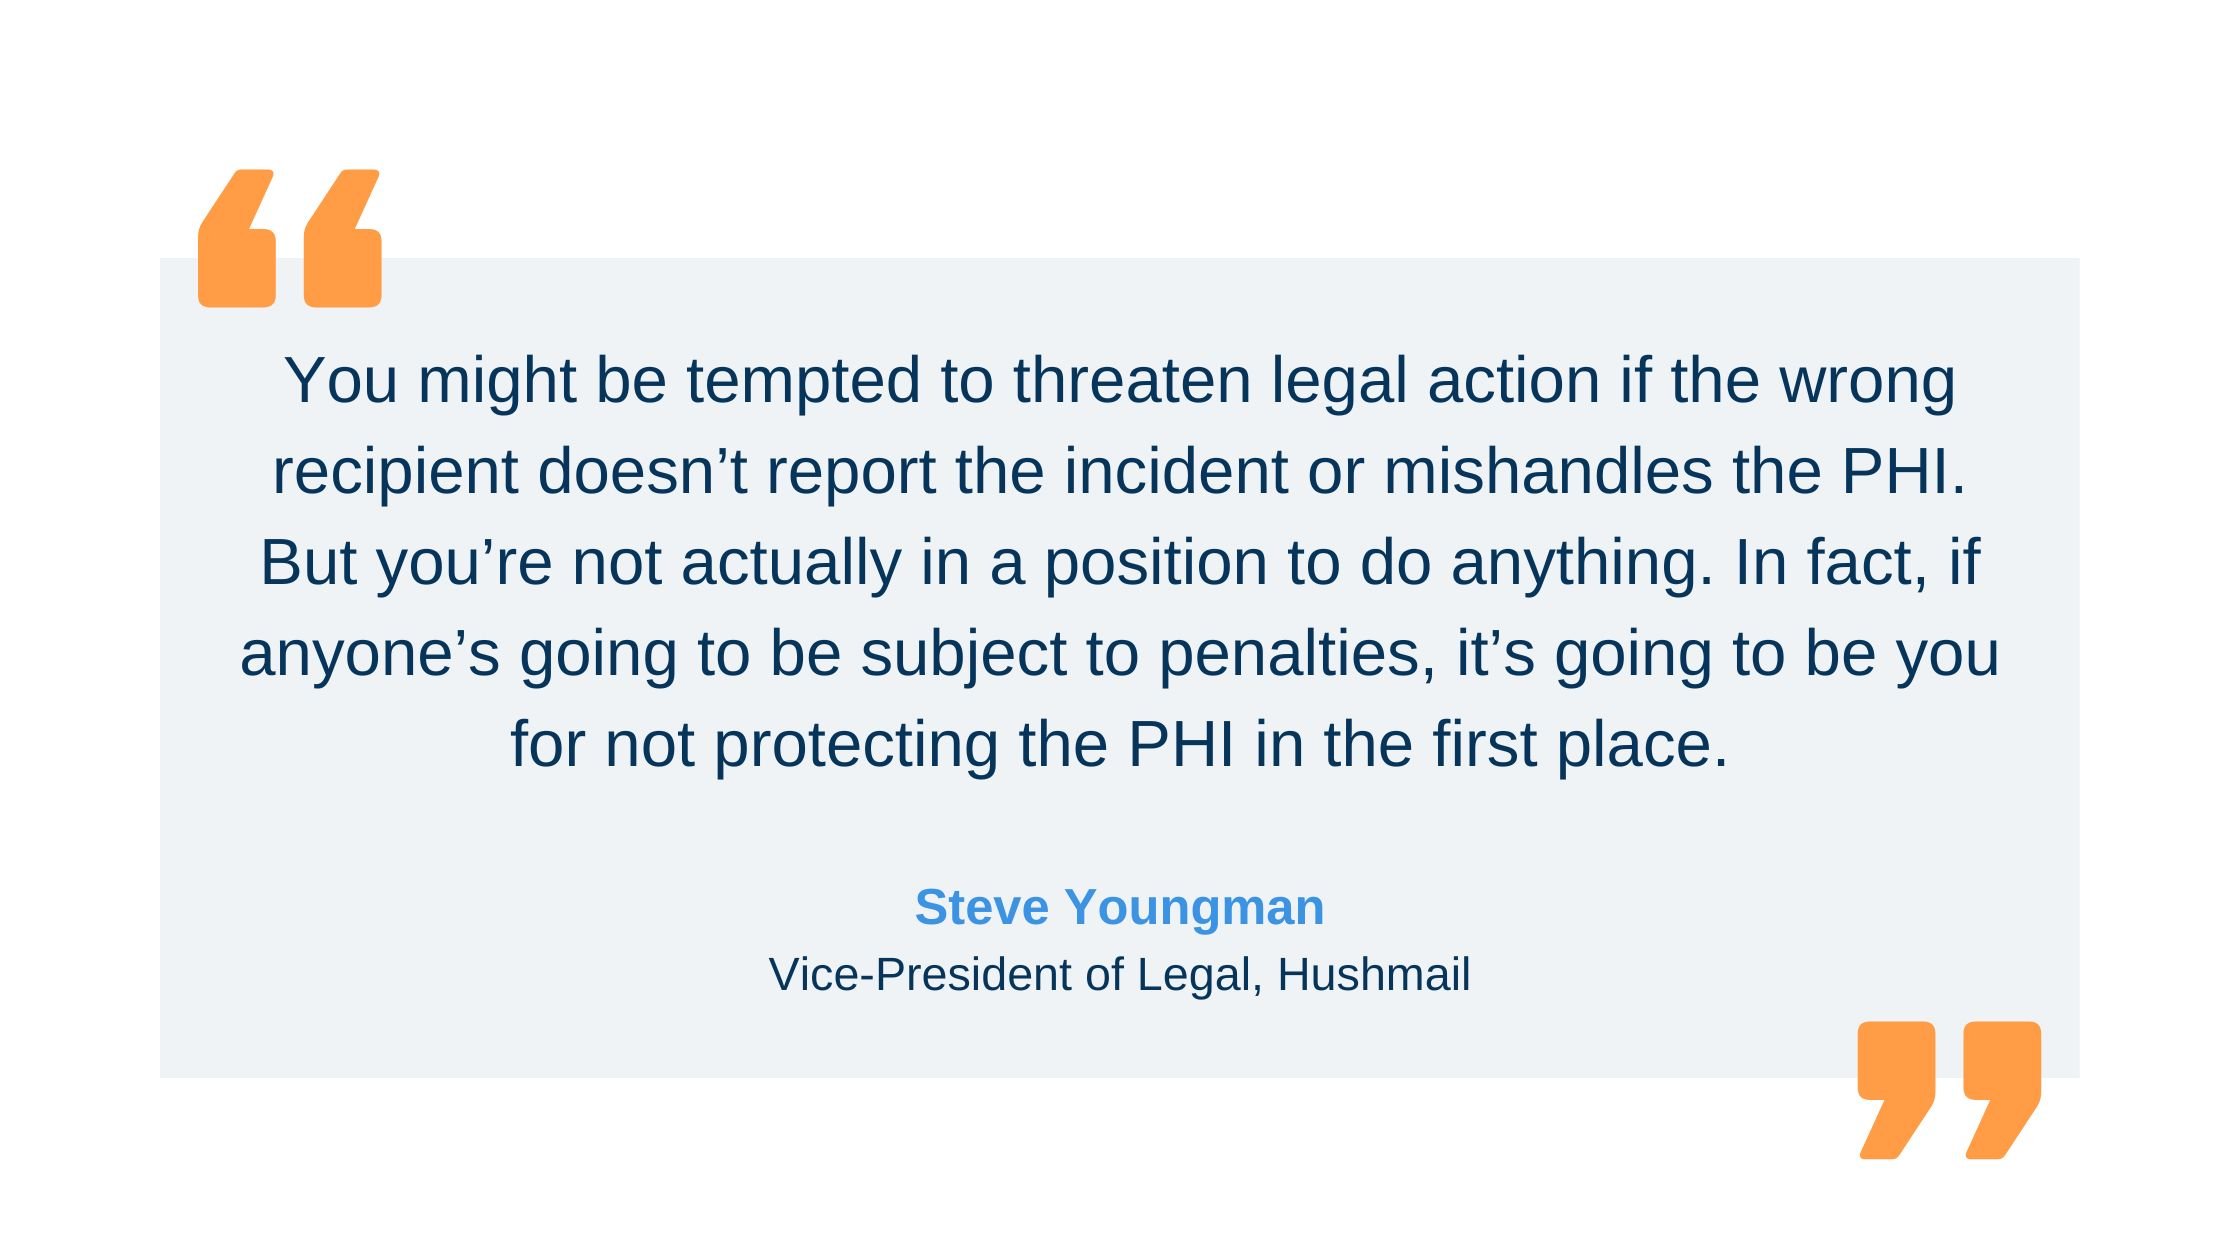 Steve Youngman quote about HIPAA disclaimers